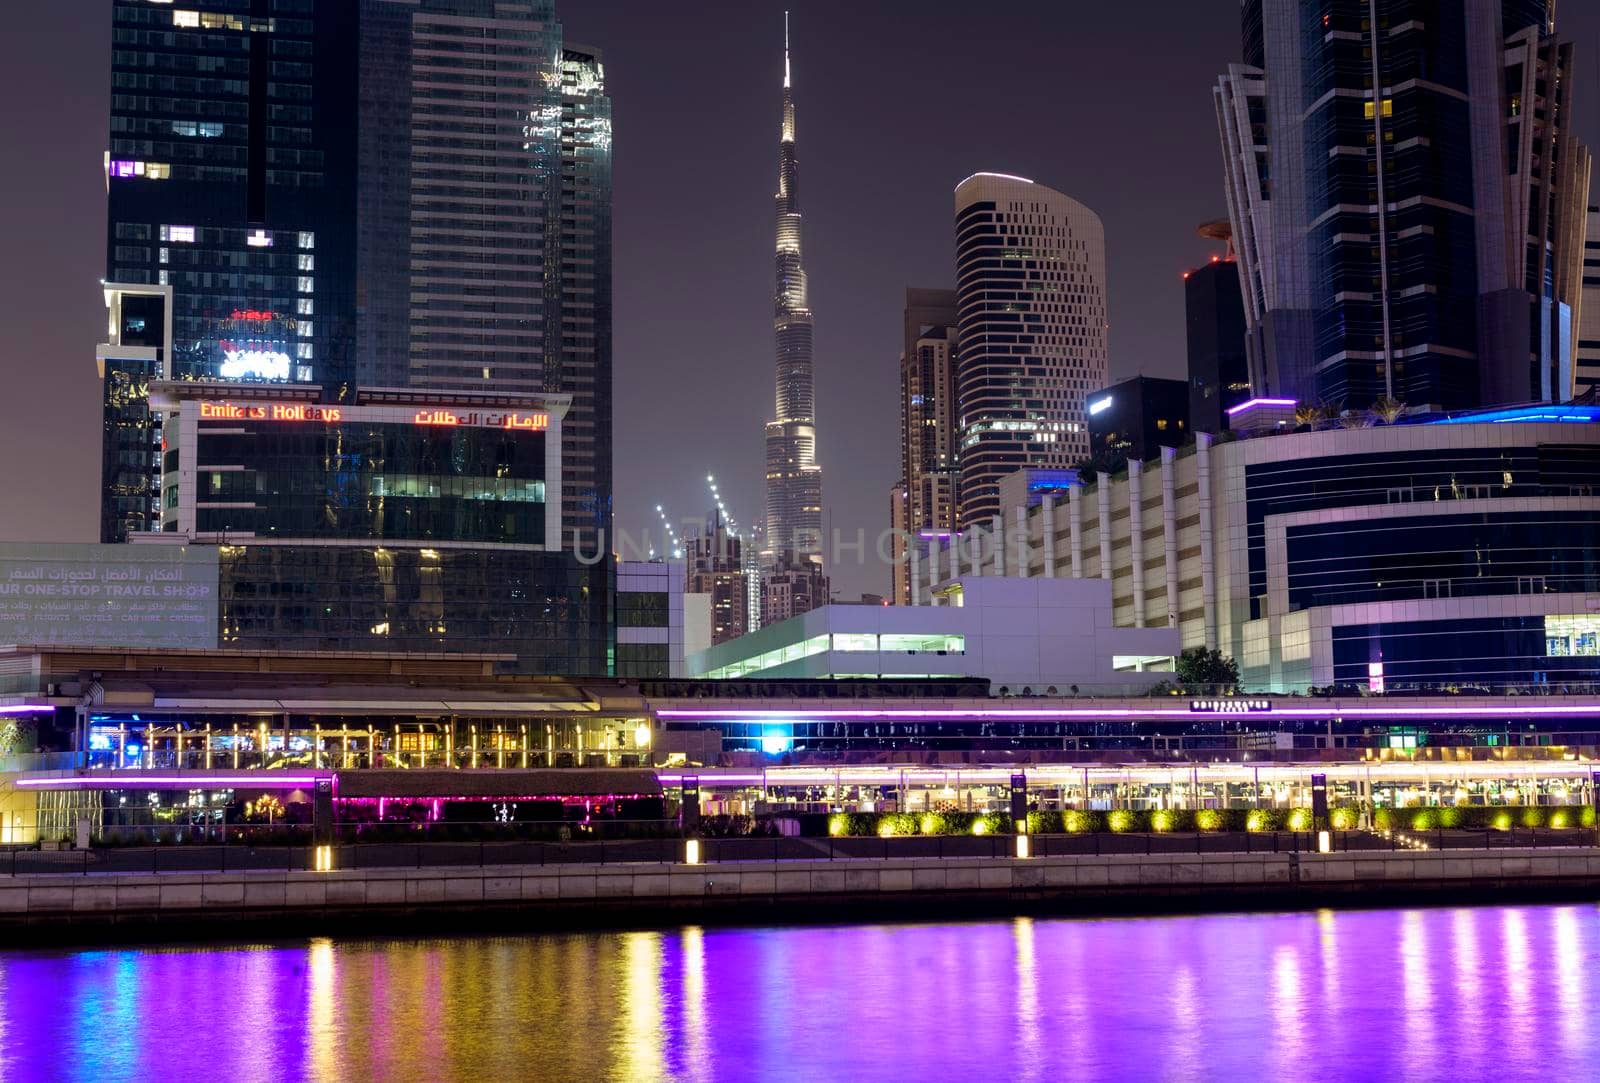 DUBAI, UAE 6th nov 2020 -view of the Burj khalifa surrounded with buildings and hotels facing the Colorful illuminated dubai canal boardwalk Waterfall in Dubai,United Arab Emirates, Middle East by sriyapixels